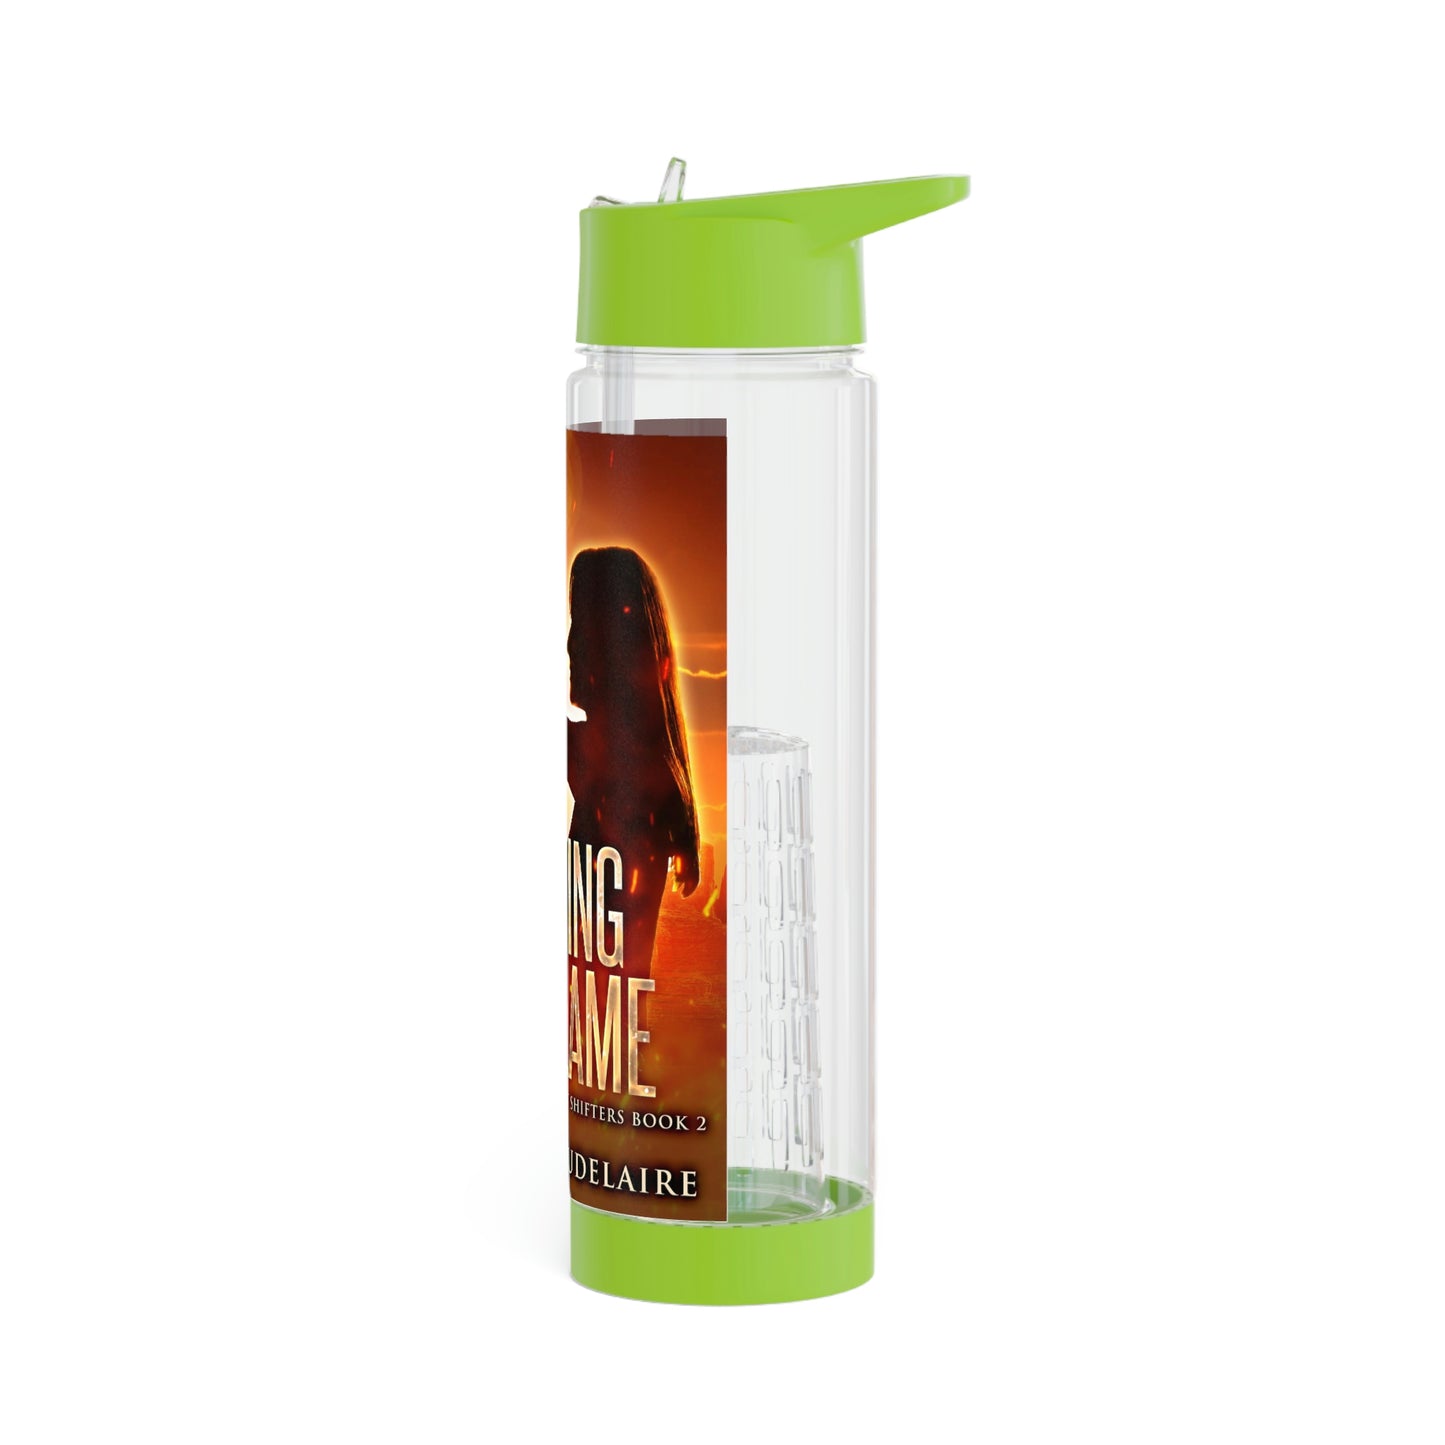 Fanning The Flame - Infuser Water Bottle